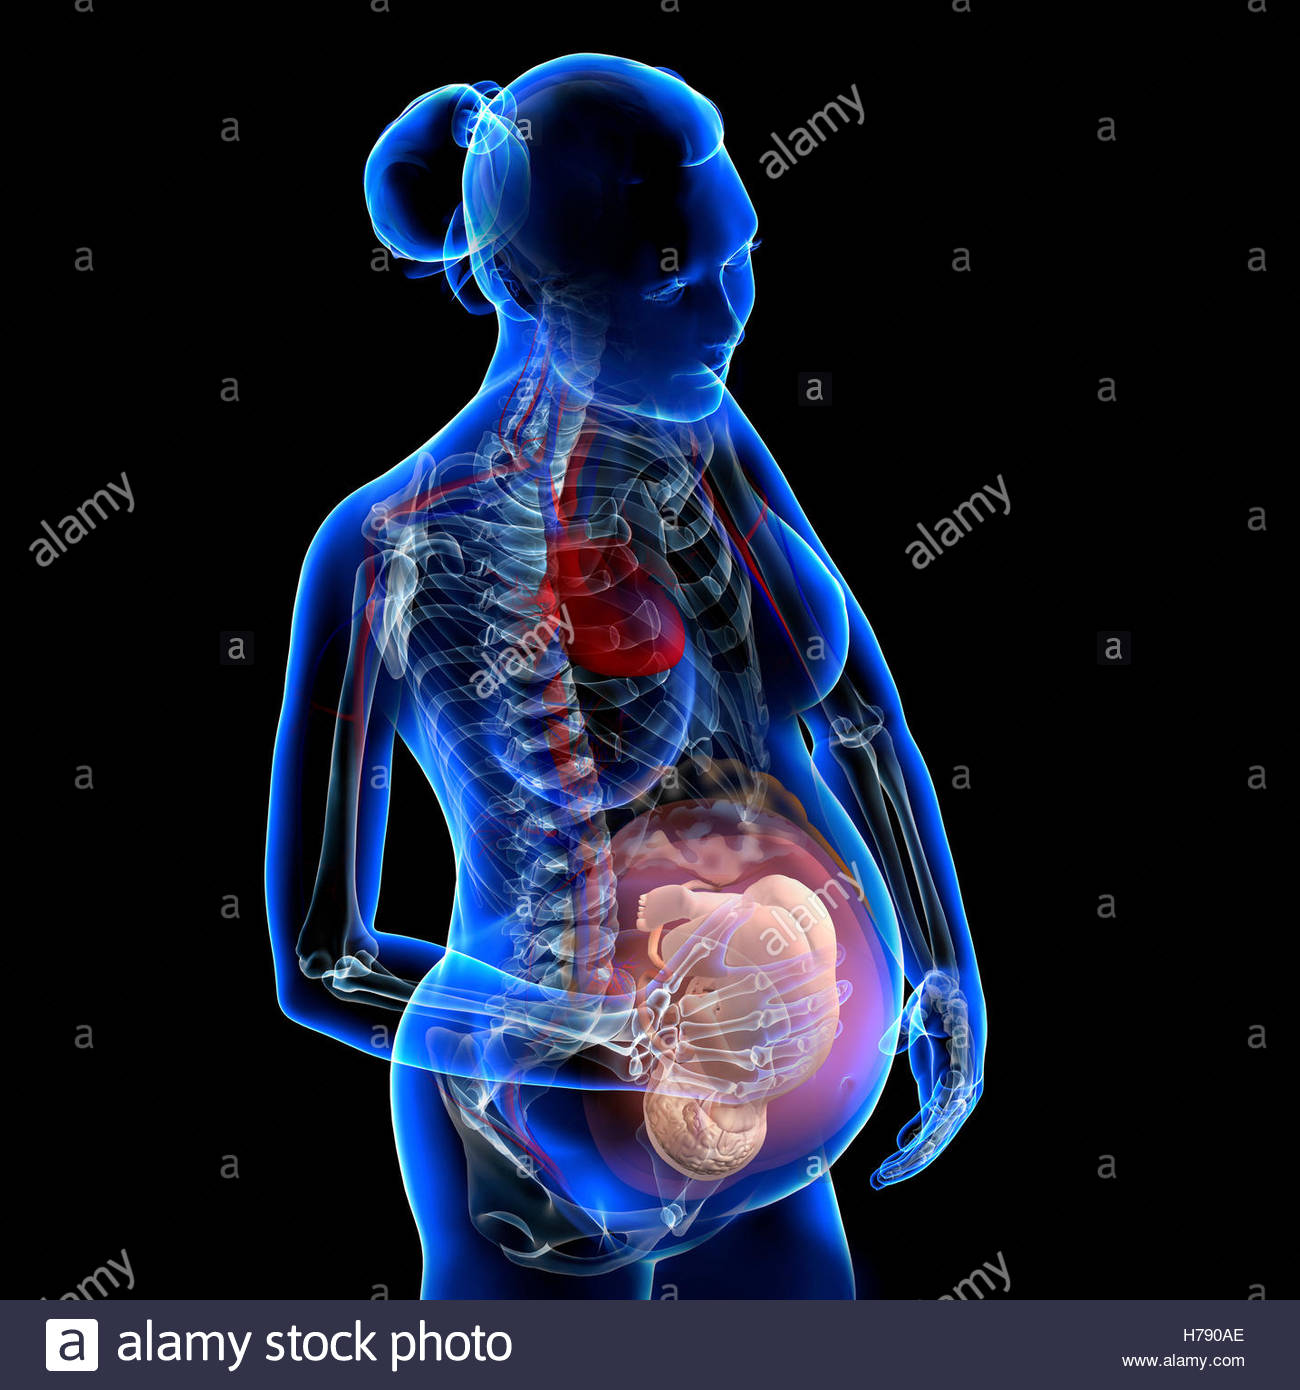 PREGNANT WOMAN, DRAWING Stock Photo, Royalty Free Image: 124973030 - Alamy